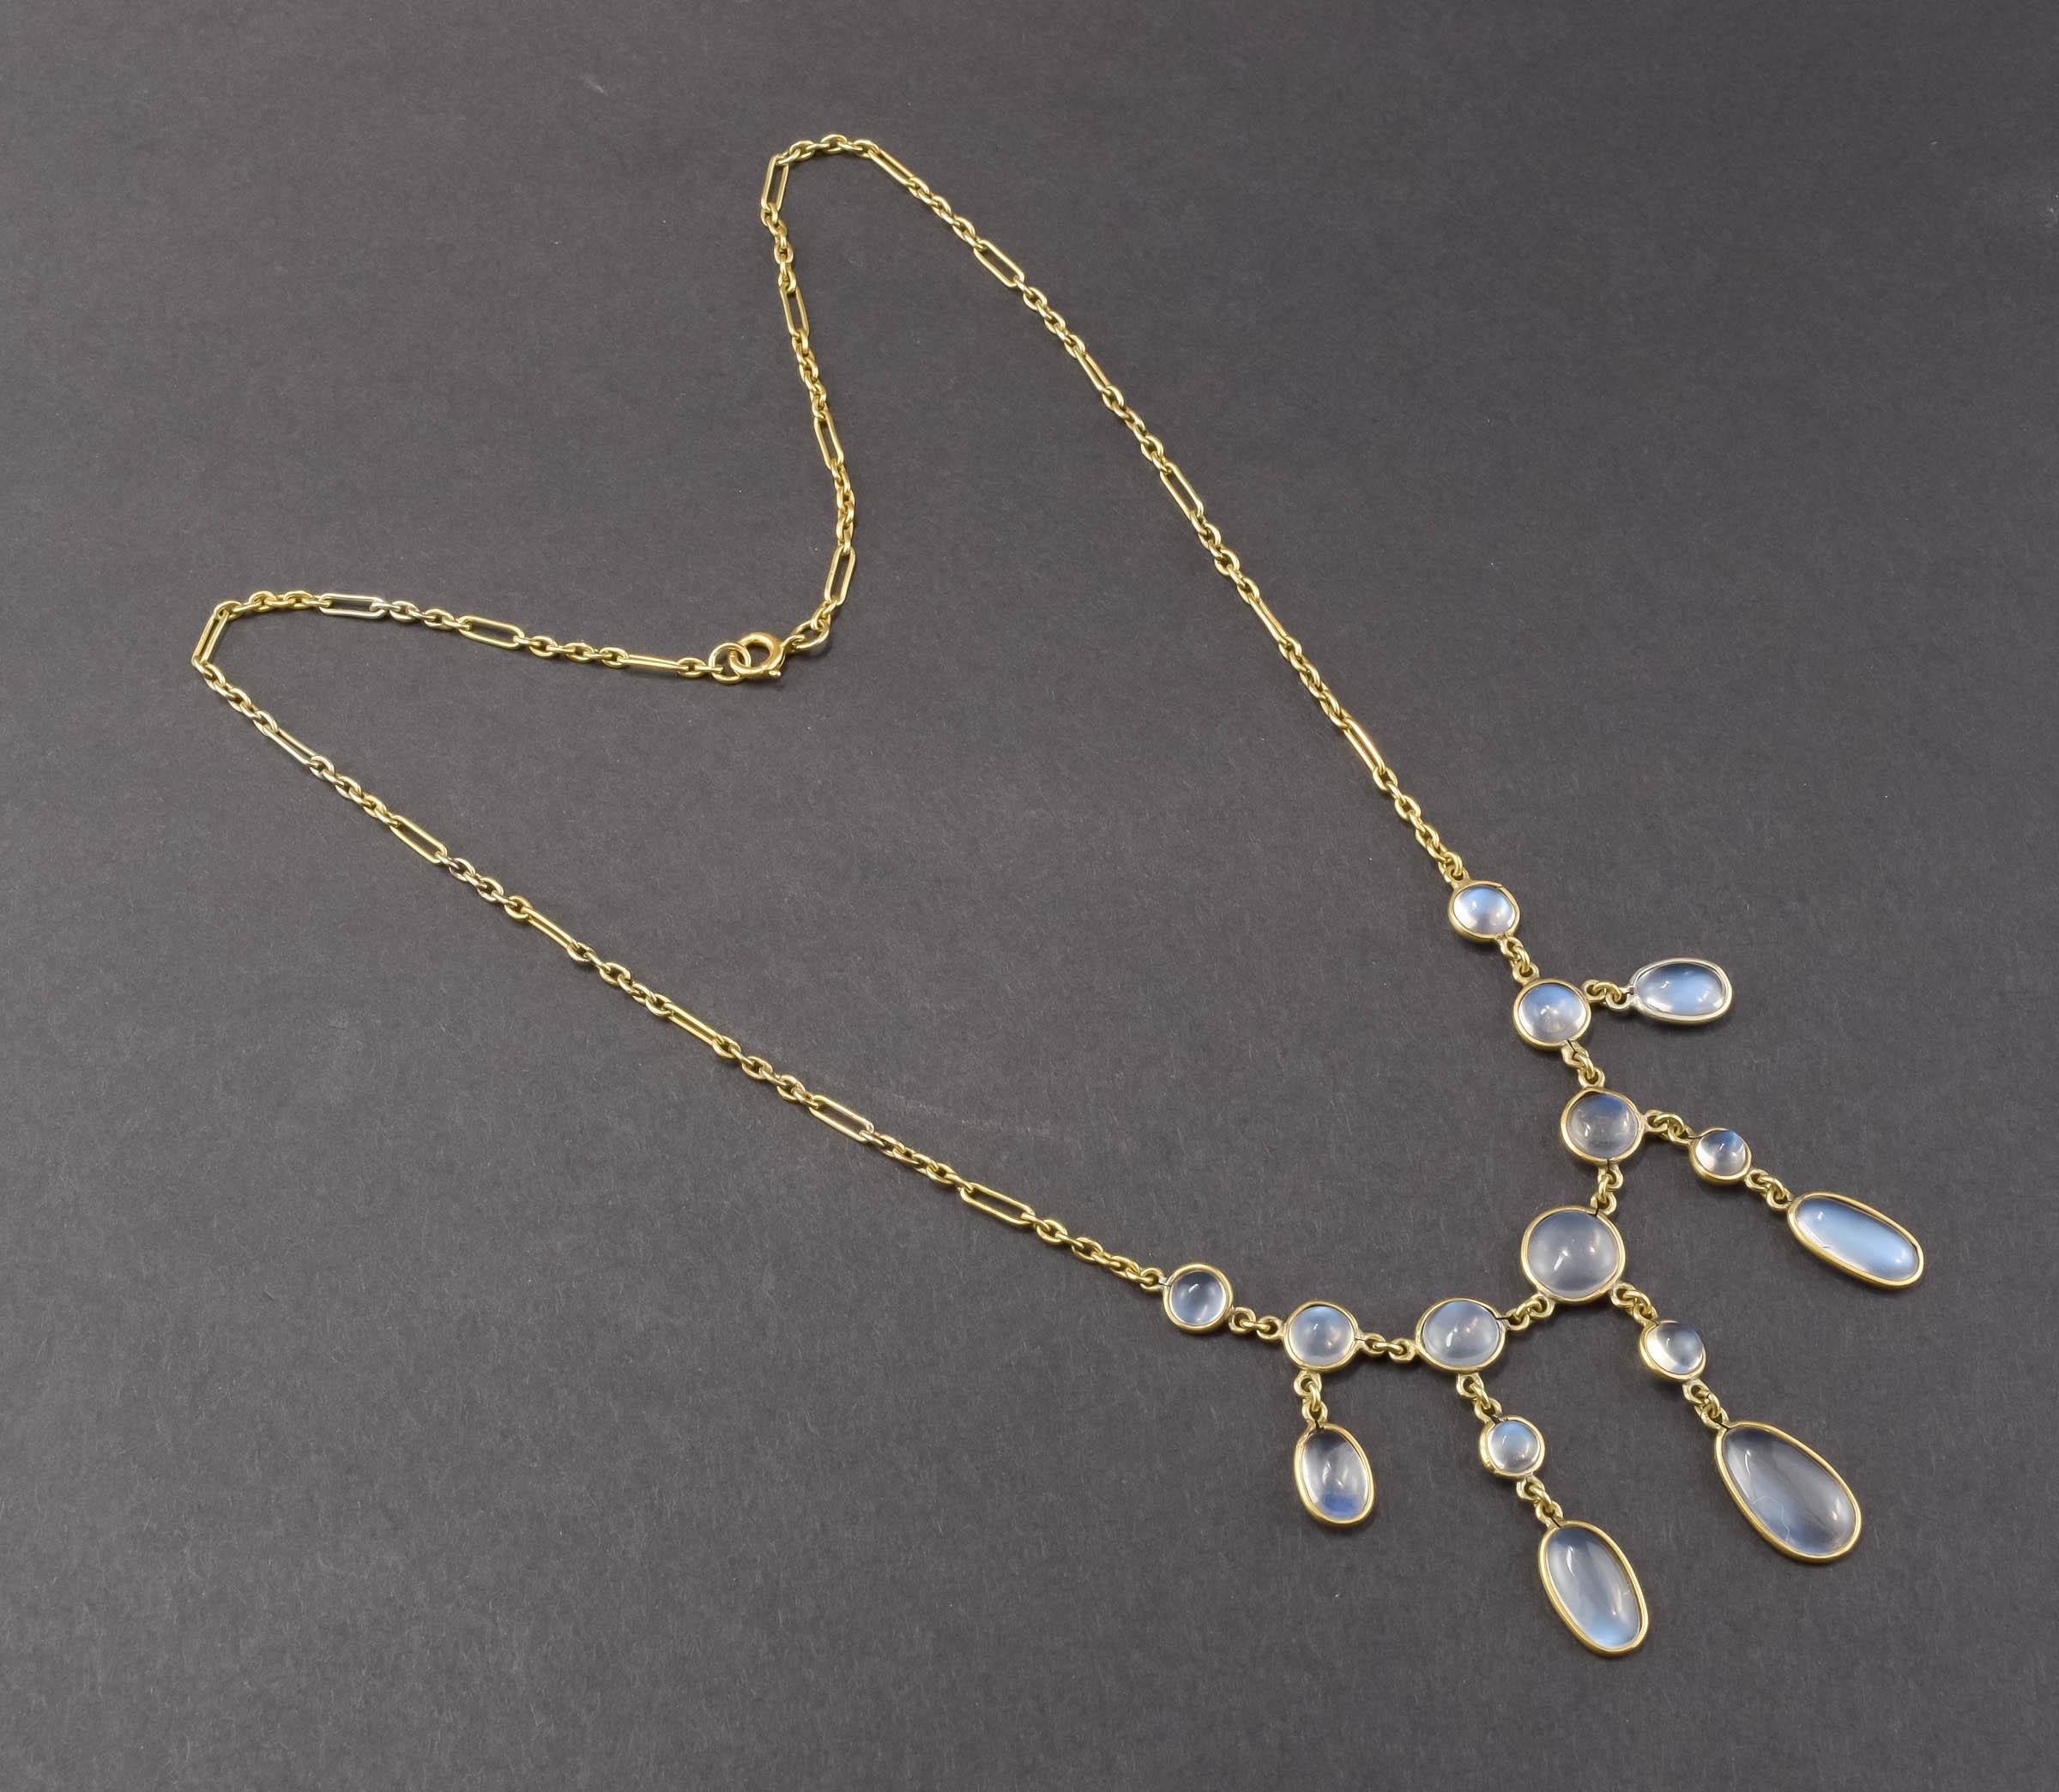 Antique 15K Gold Moonstone Drop Necklace with Fancy Link Chain For Sale 2